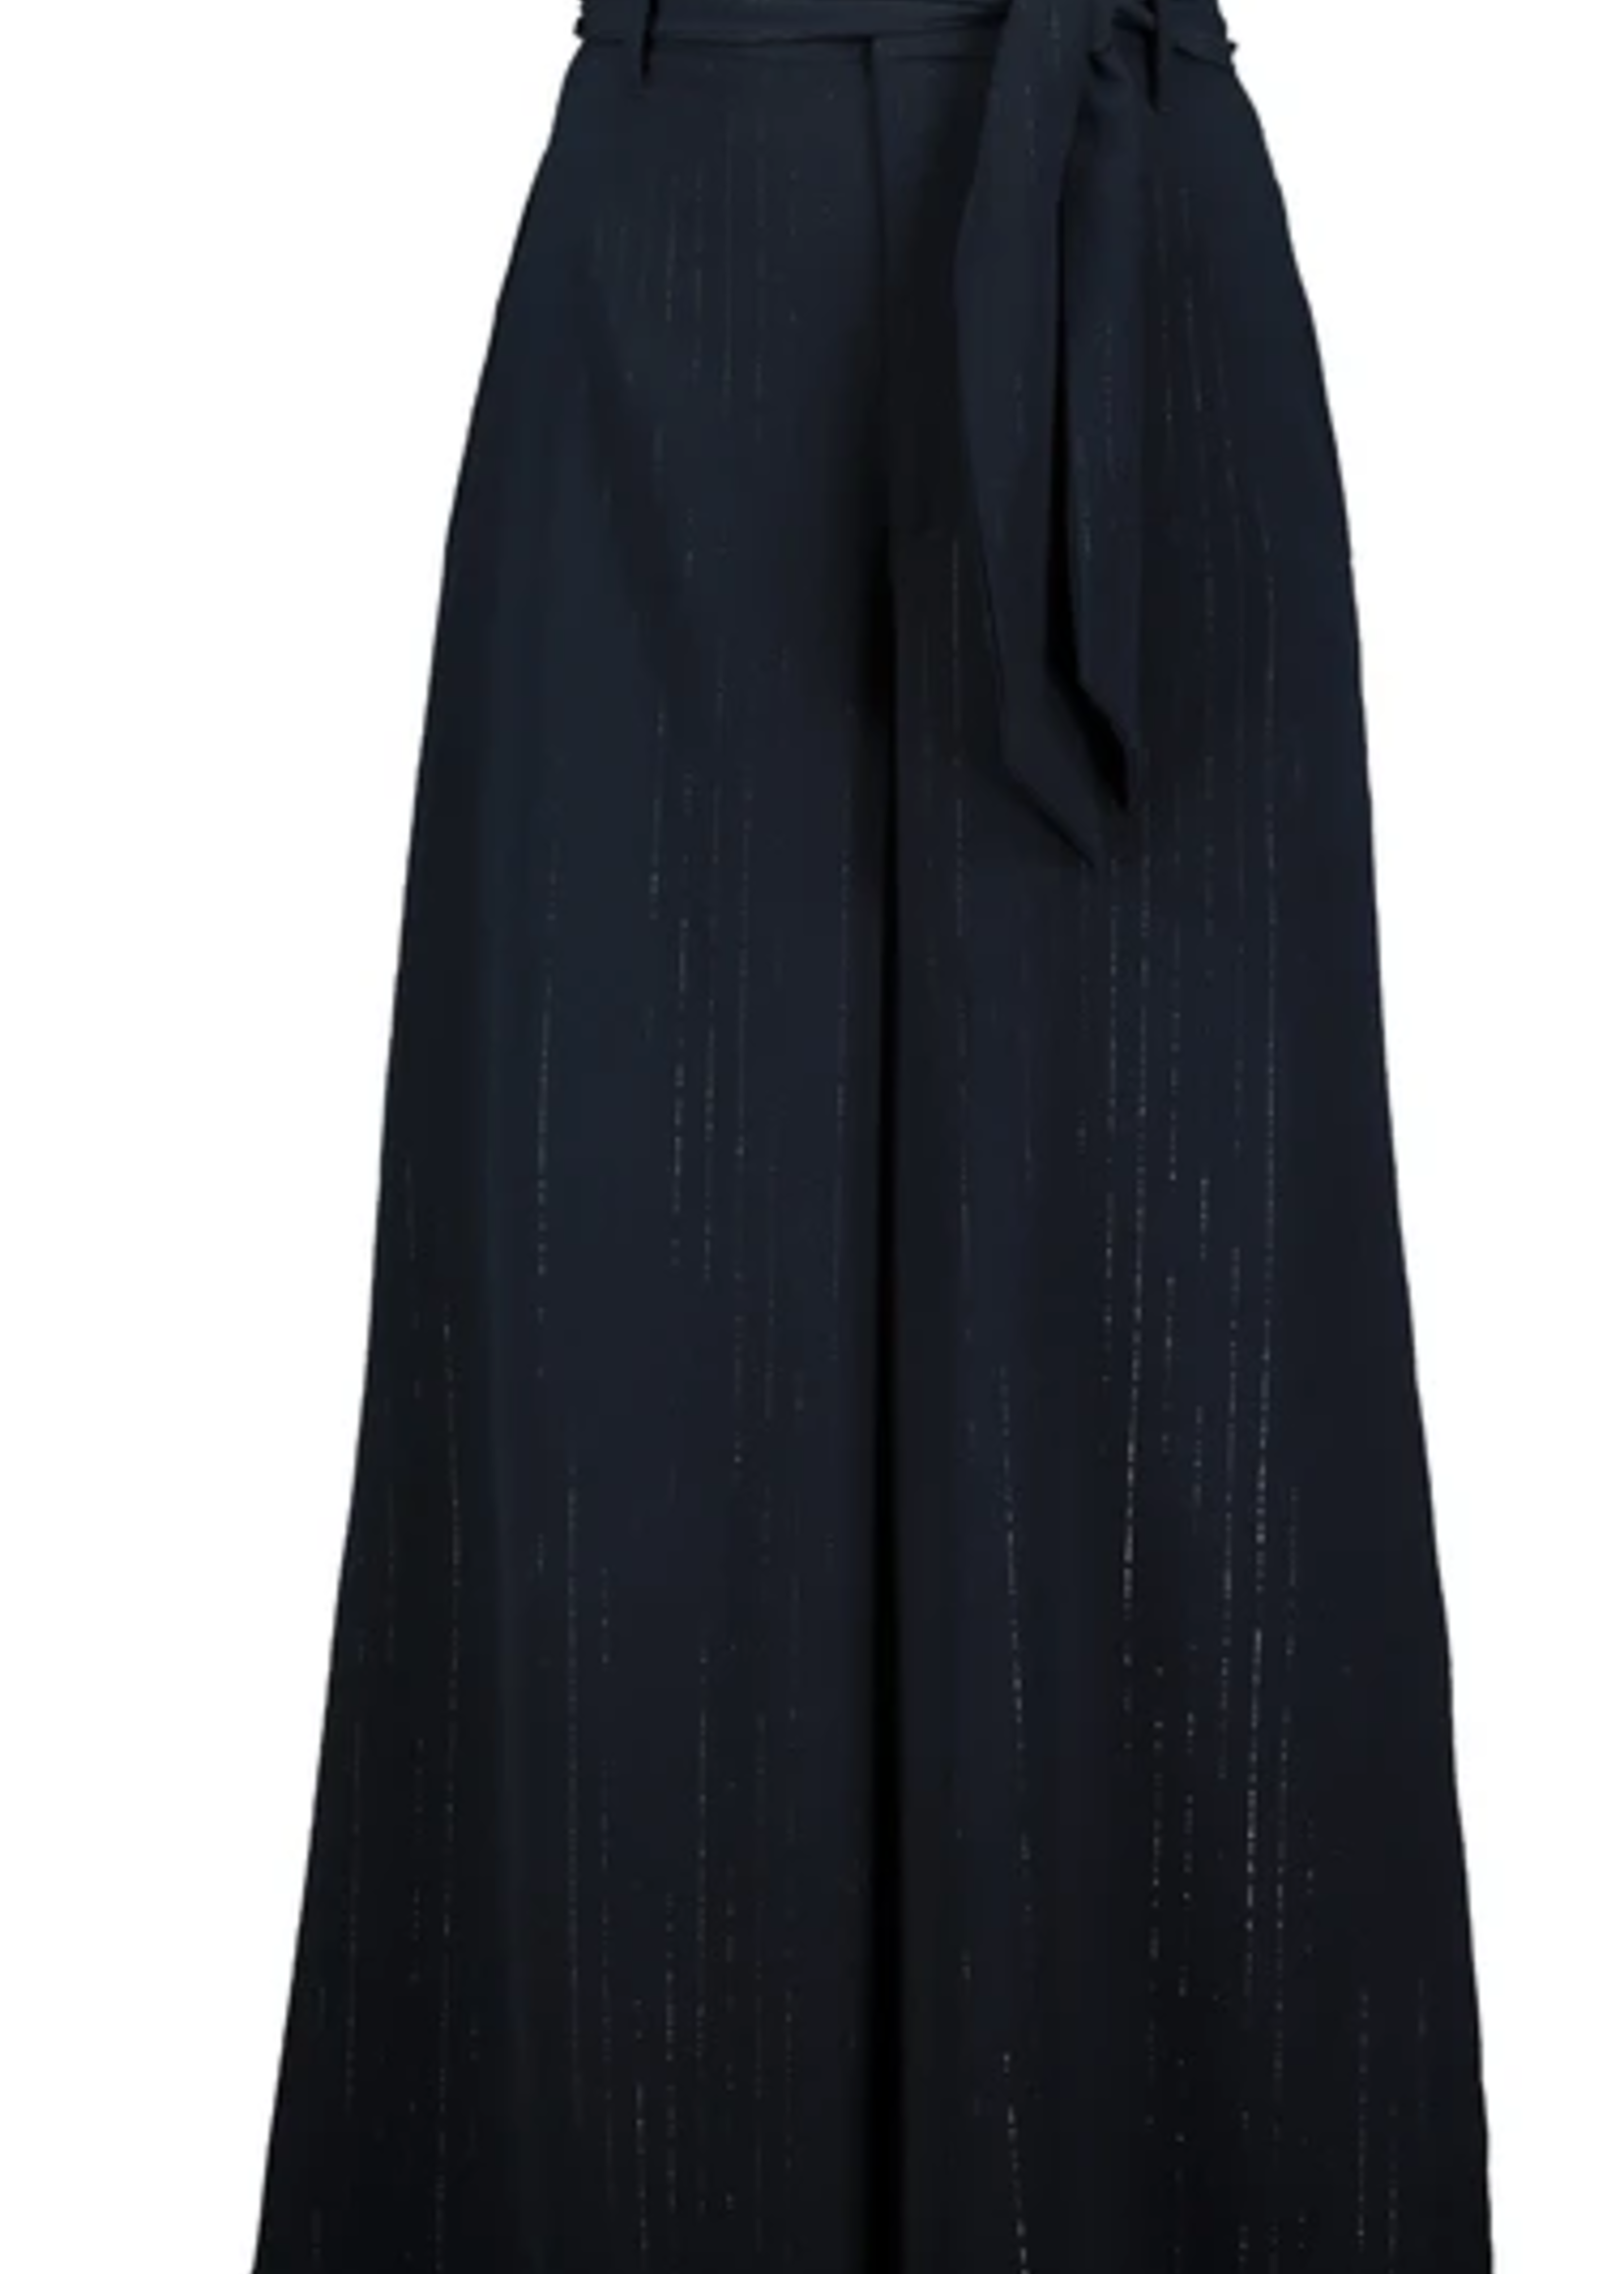 BISHOP+YOUNG FEMME WIDE LEG PANT